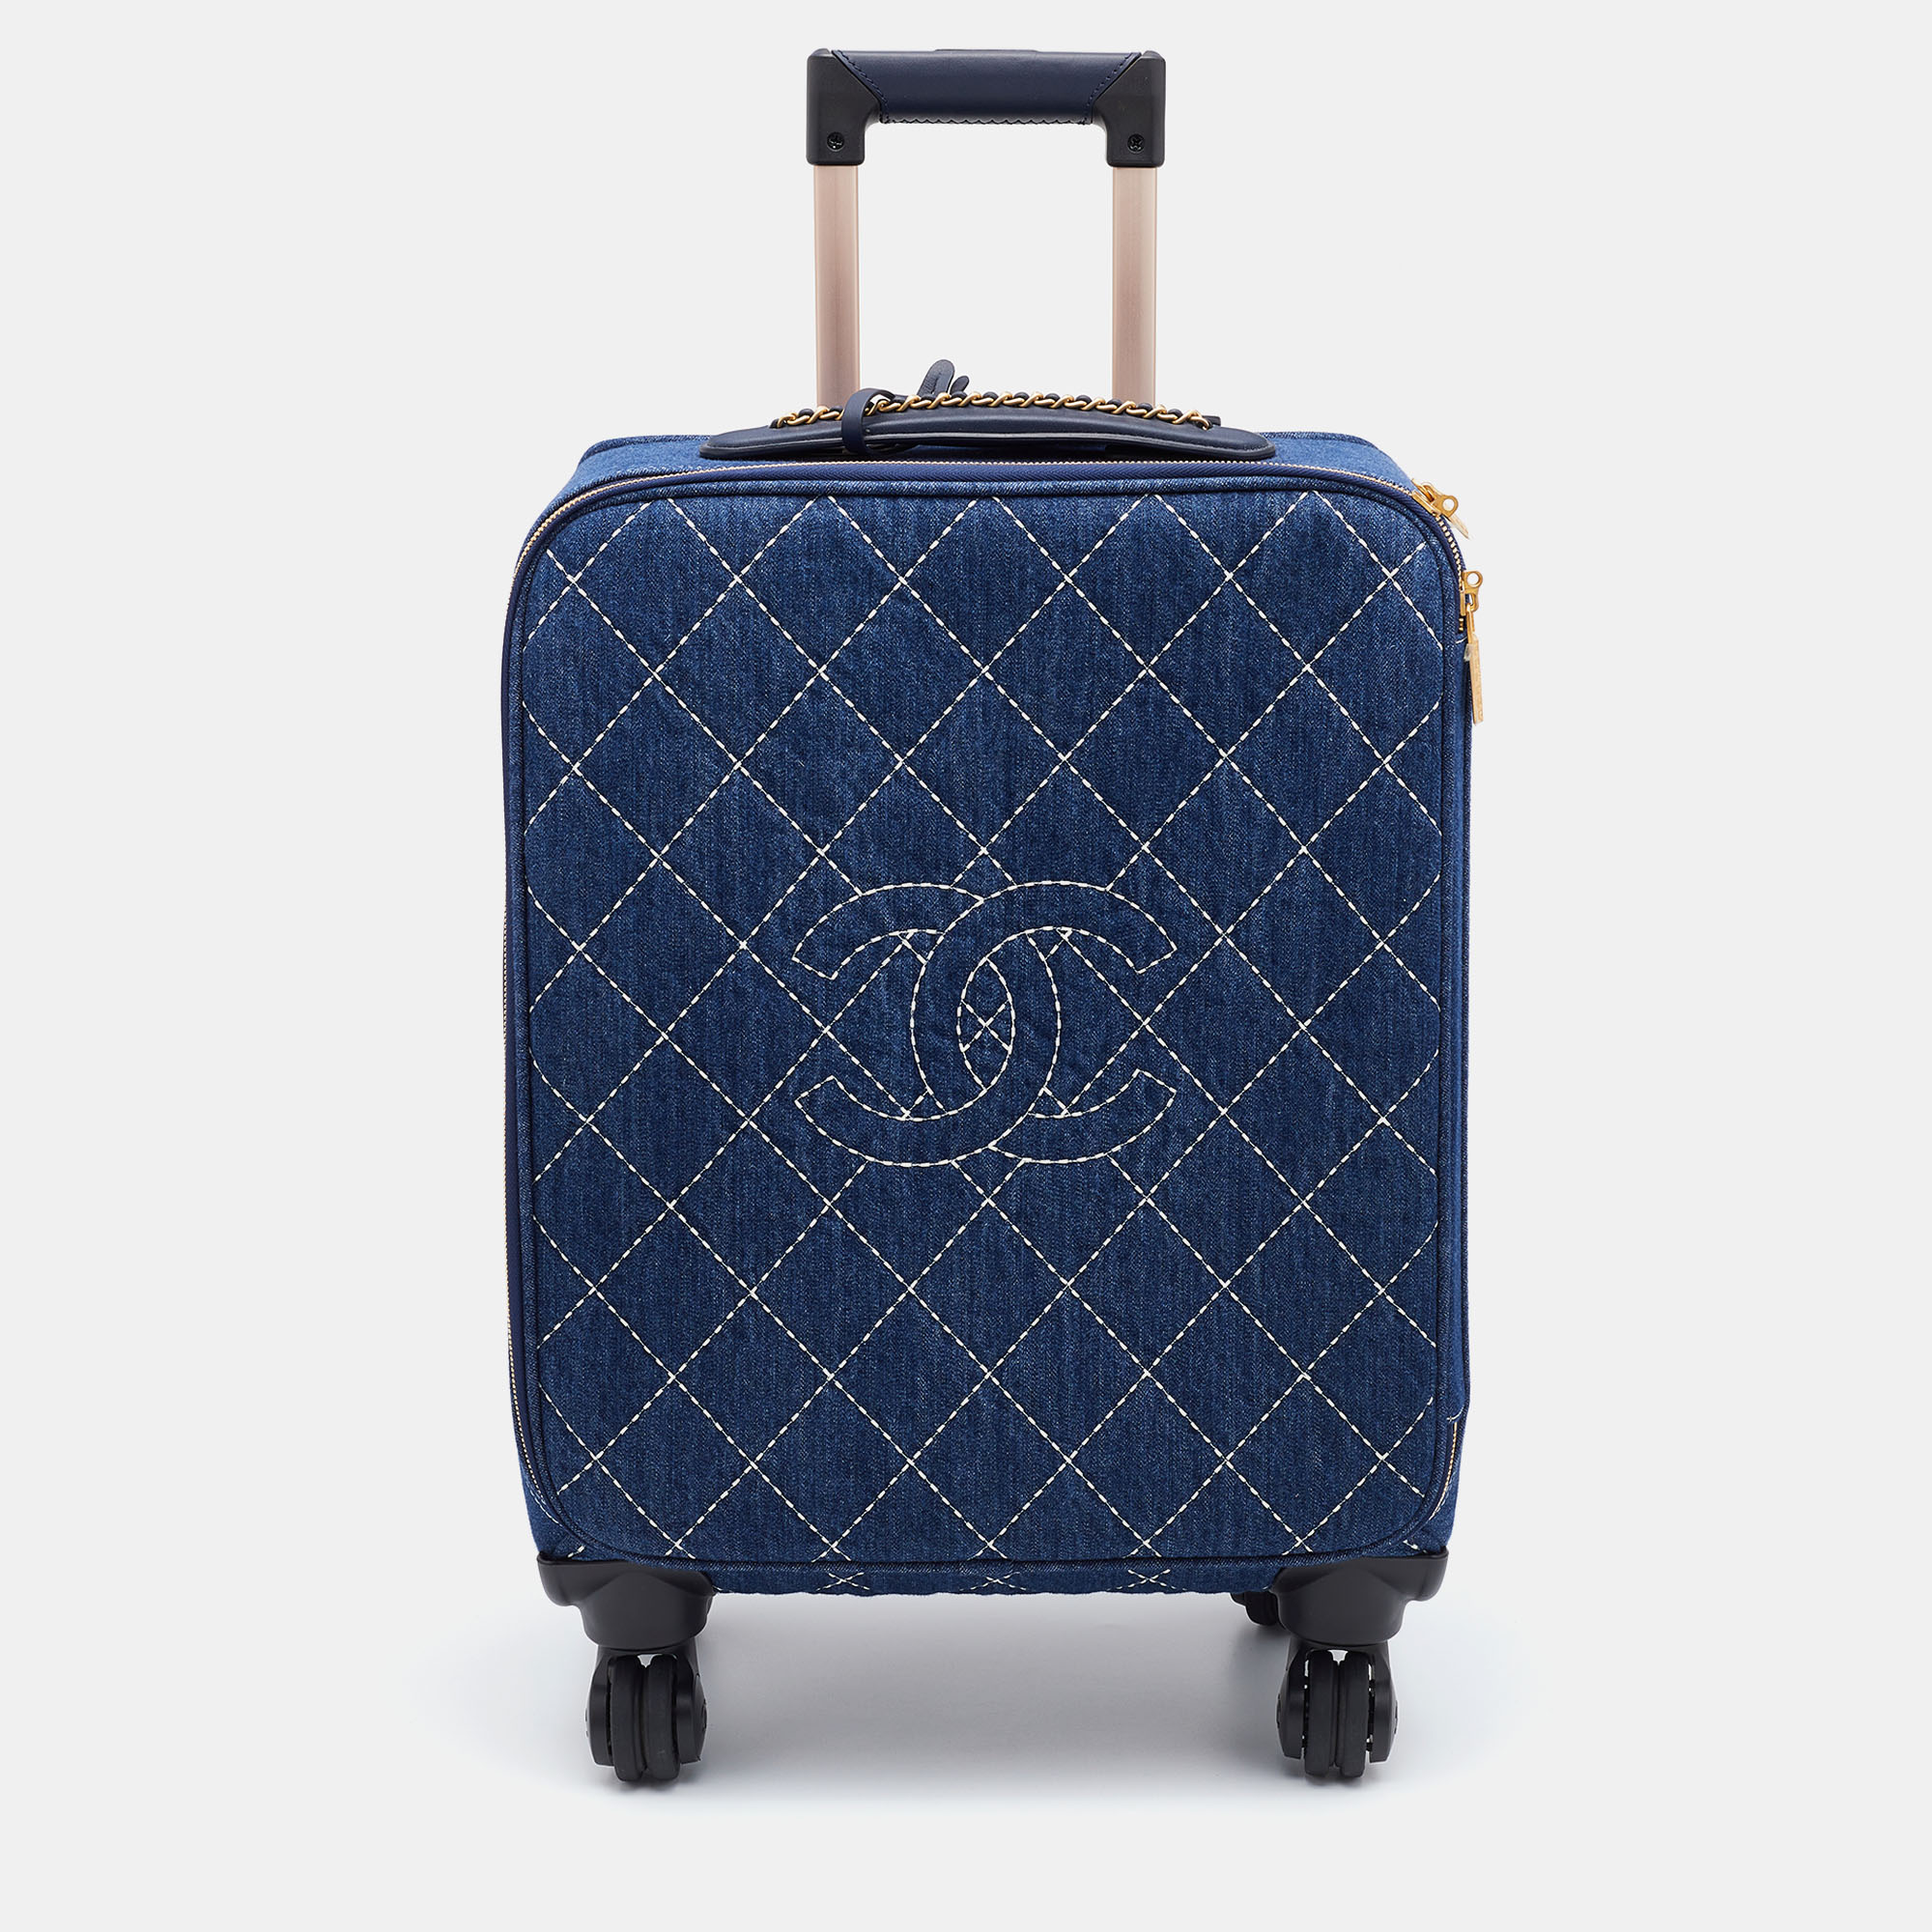 Chanel Blue Quilted Denim and Leather Coco Case Trolley